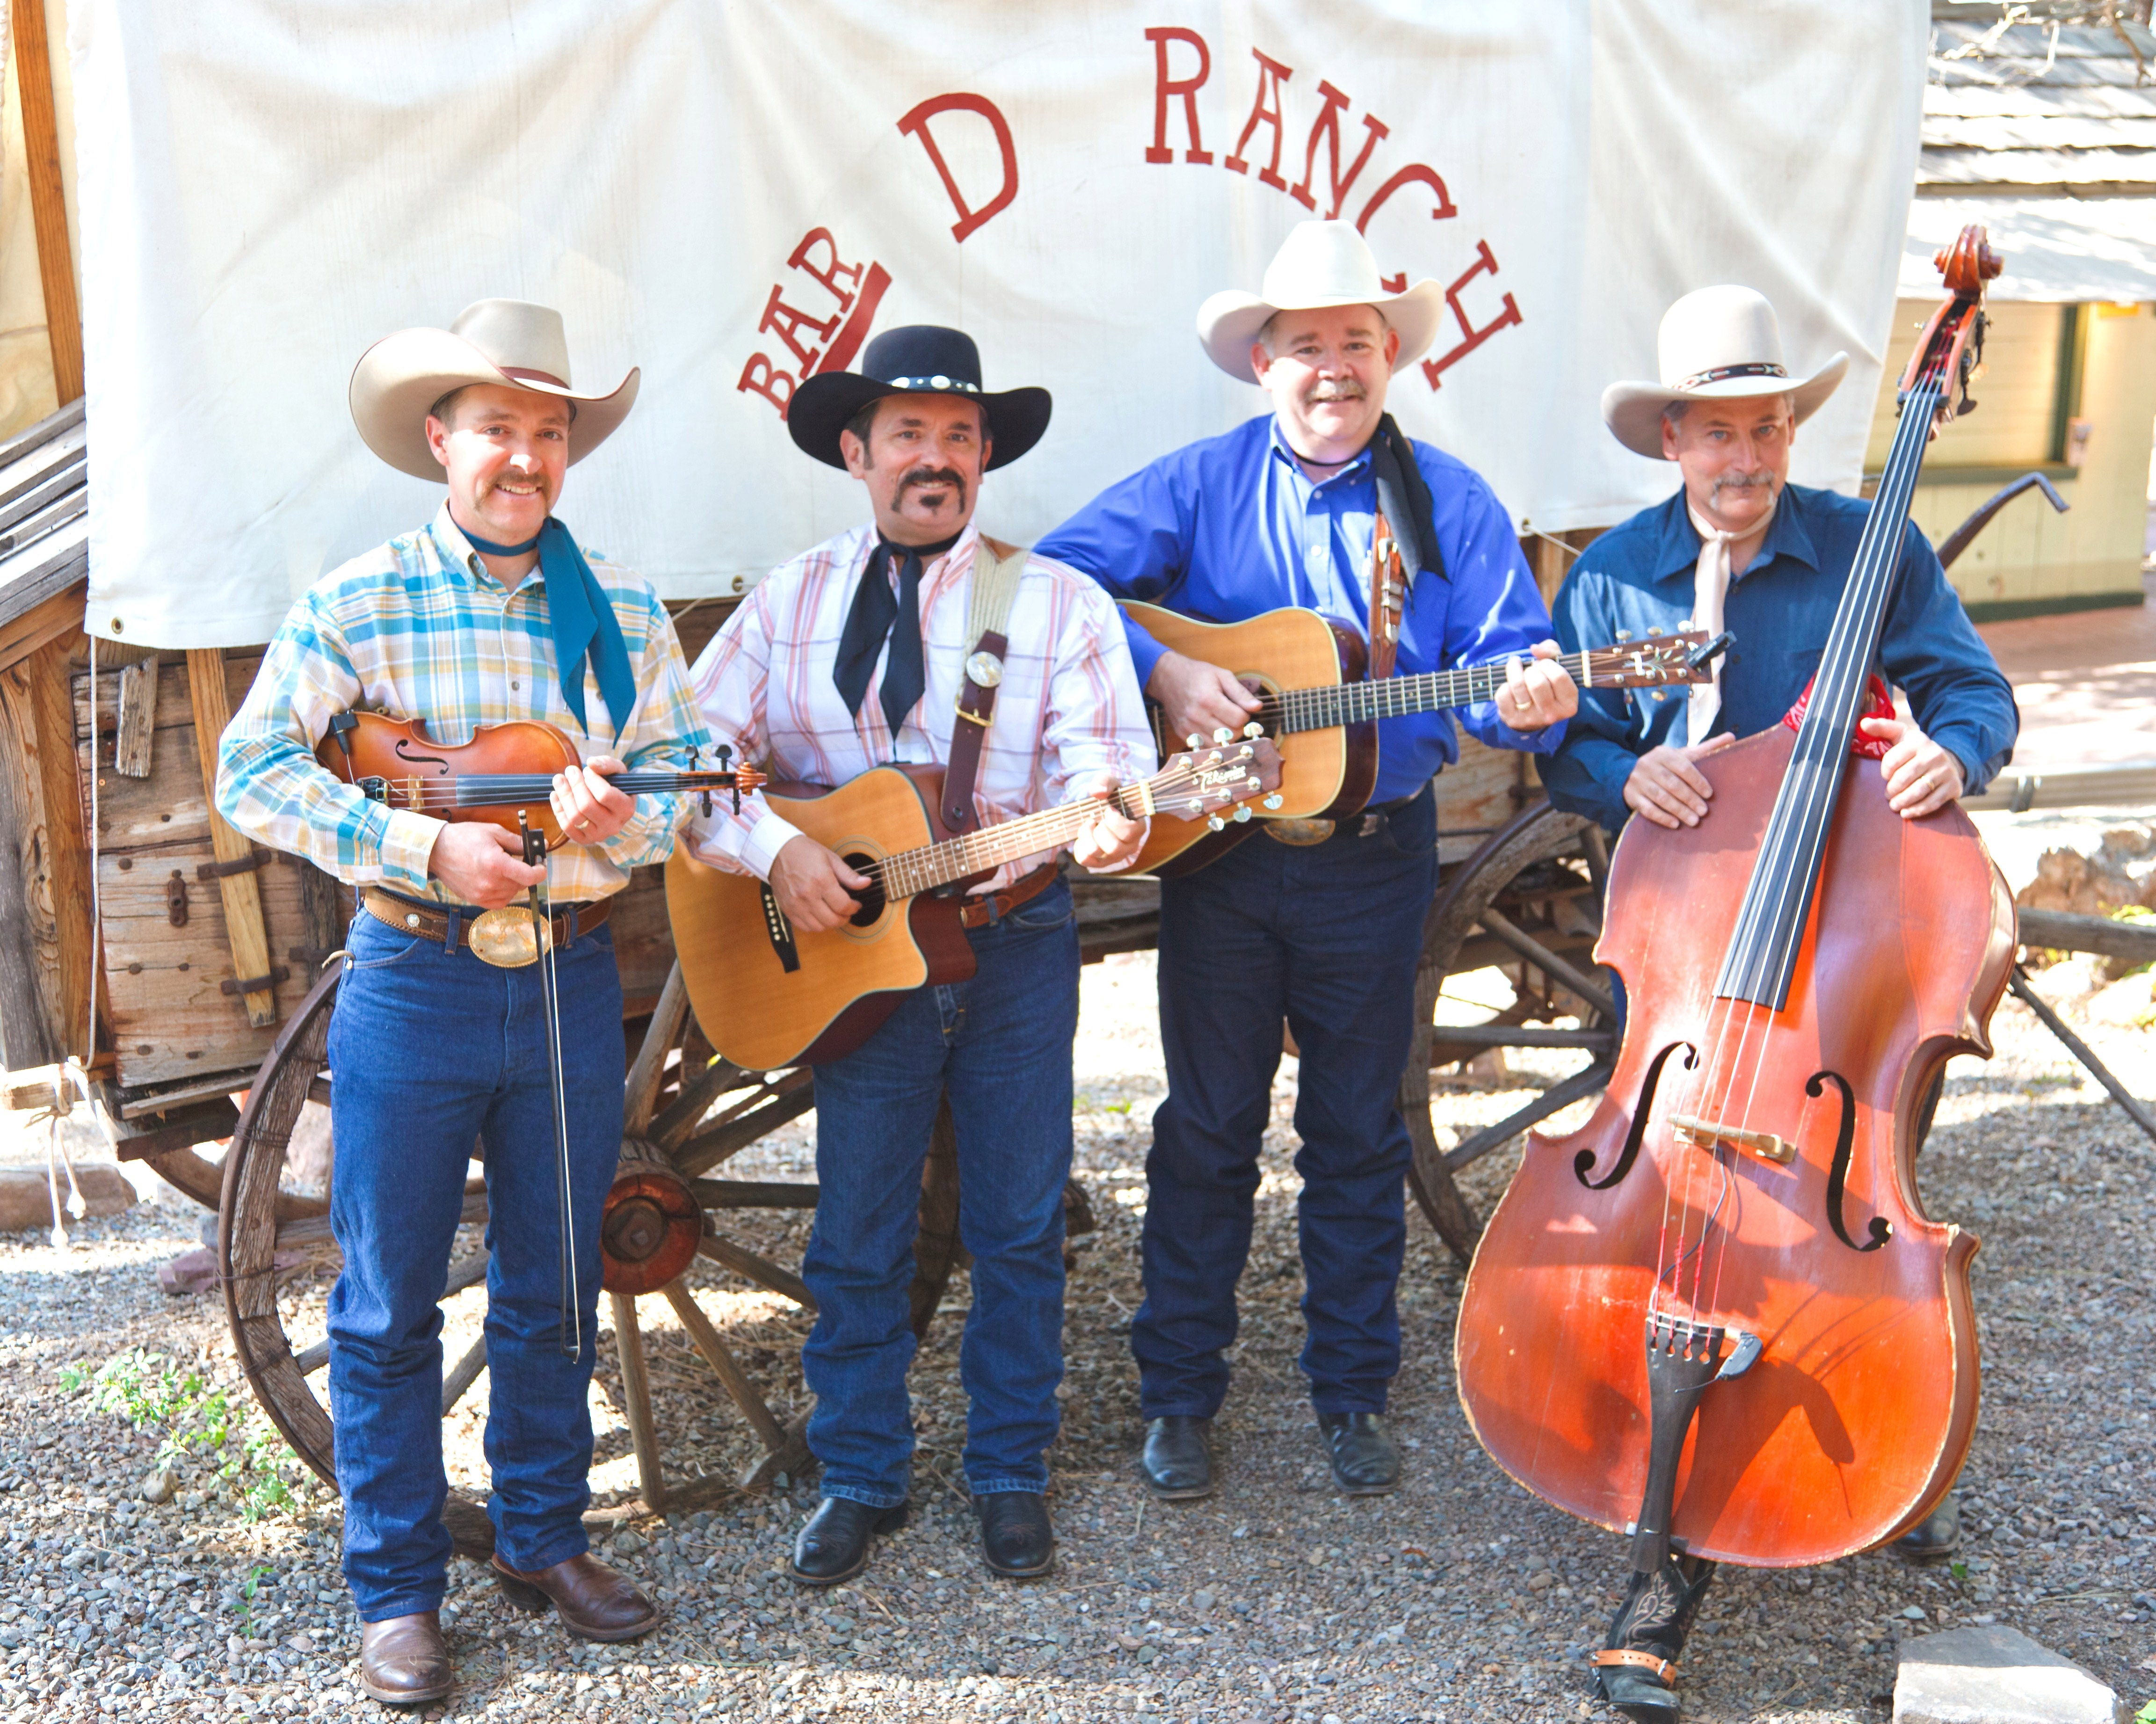 BarD Wranglers return to the Community Concert Hall on Dec. 19